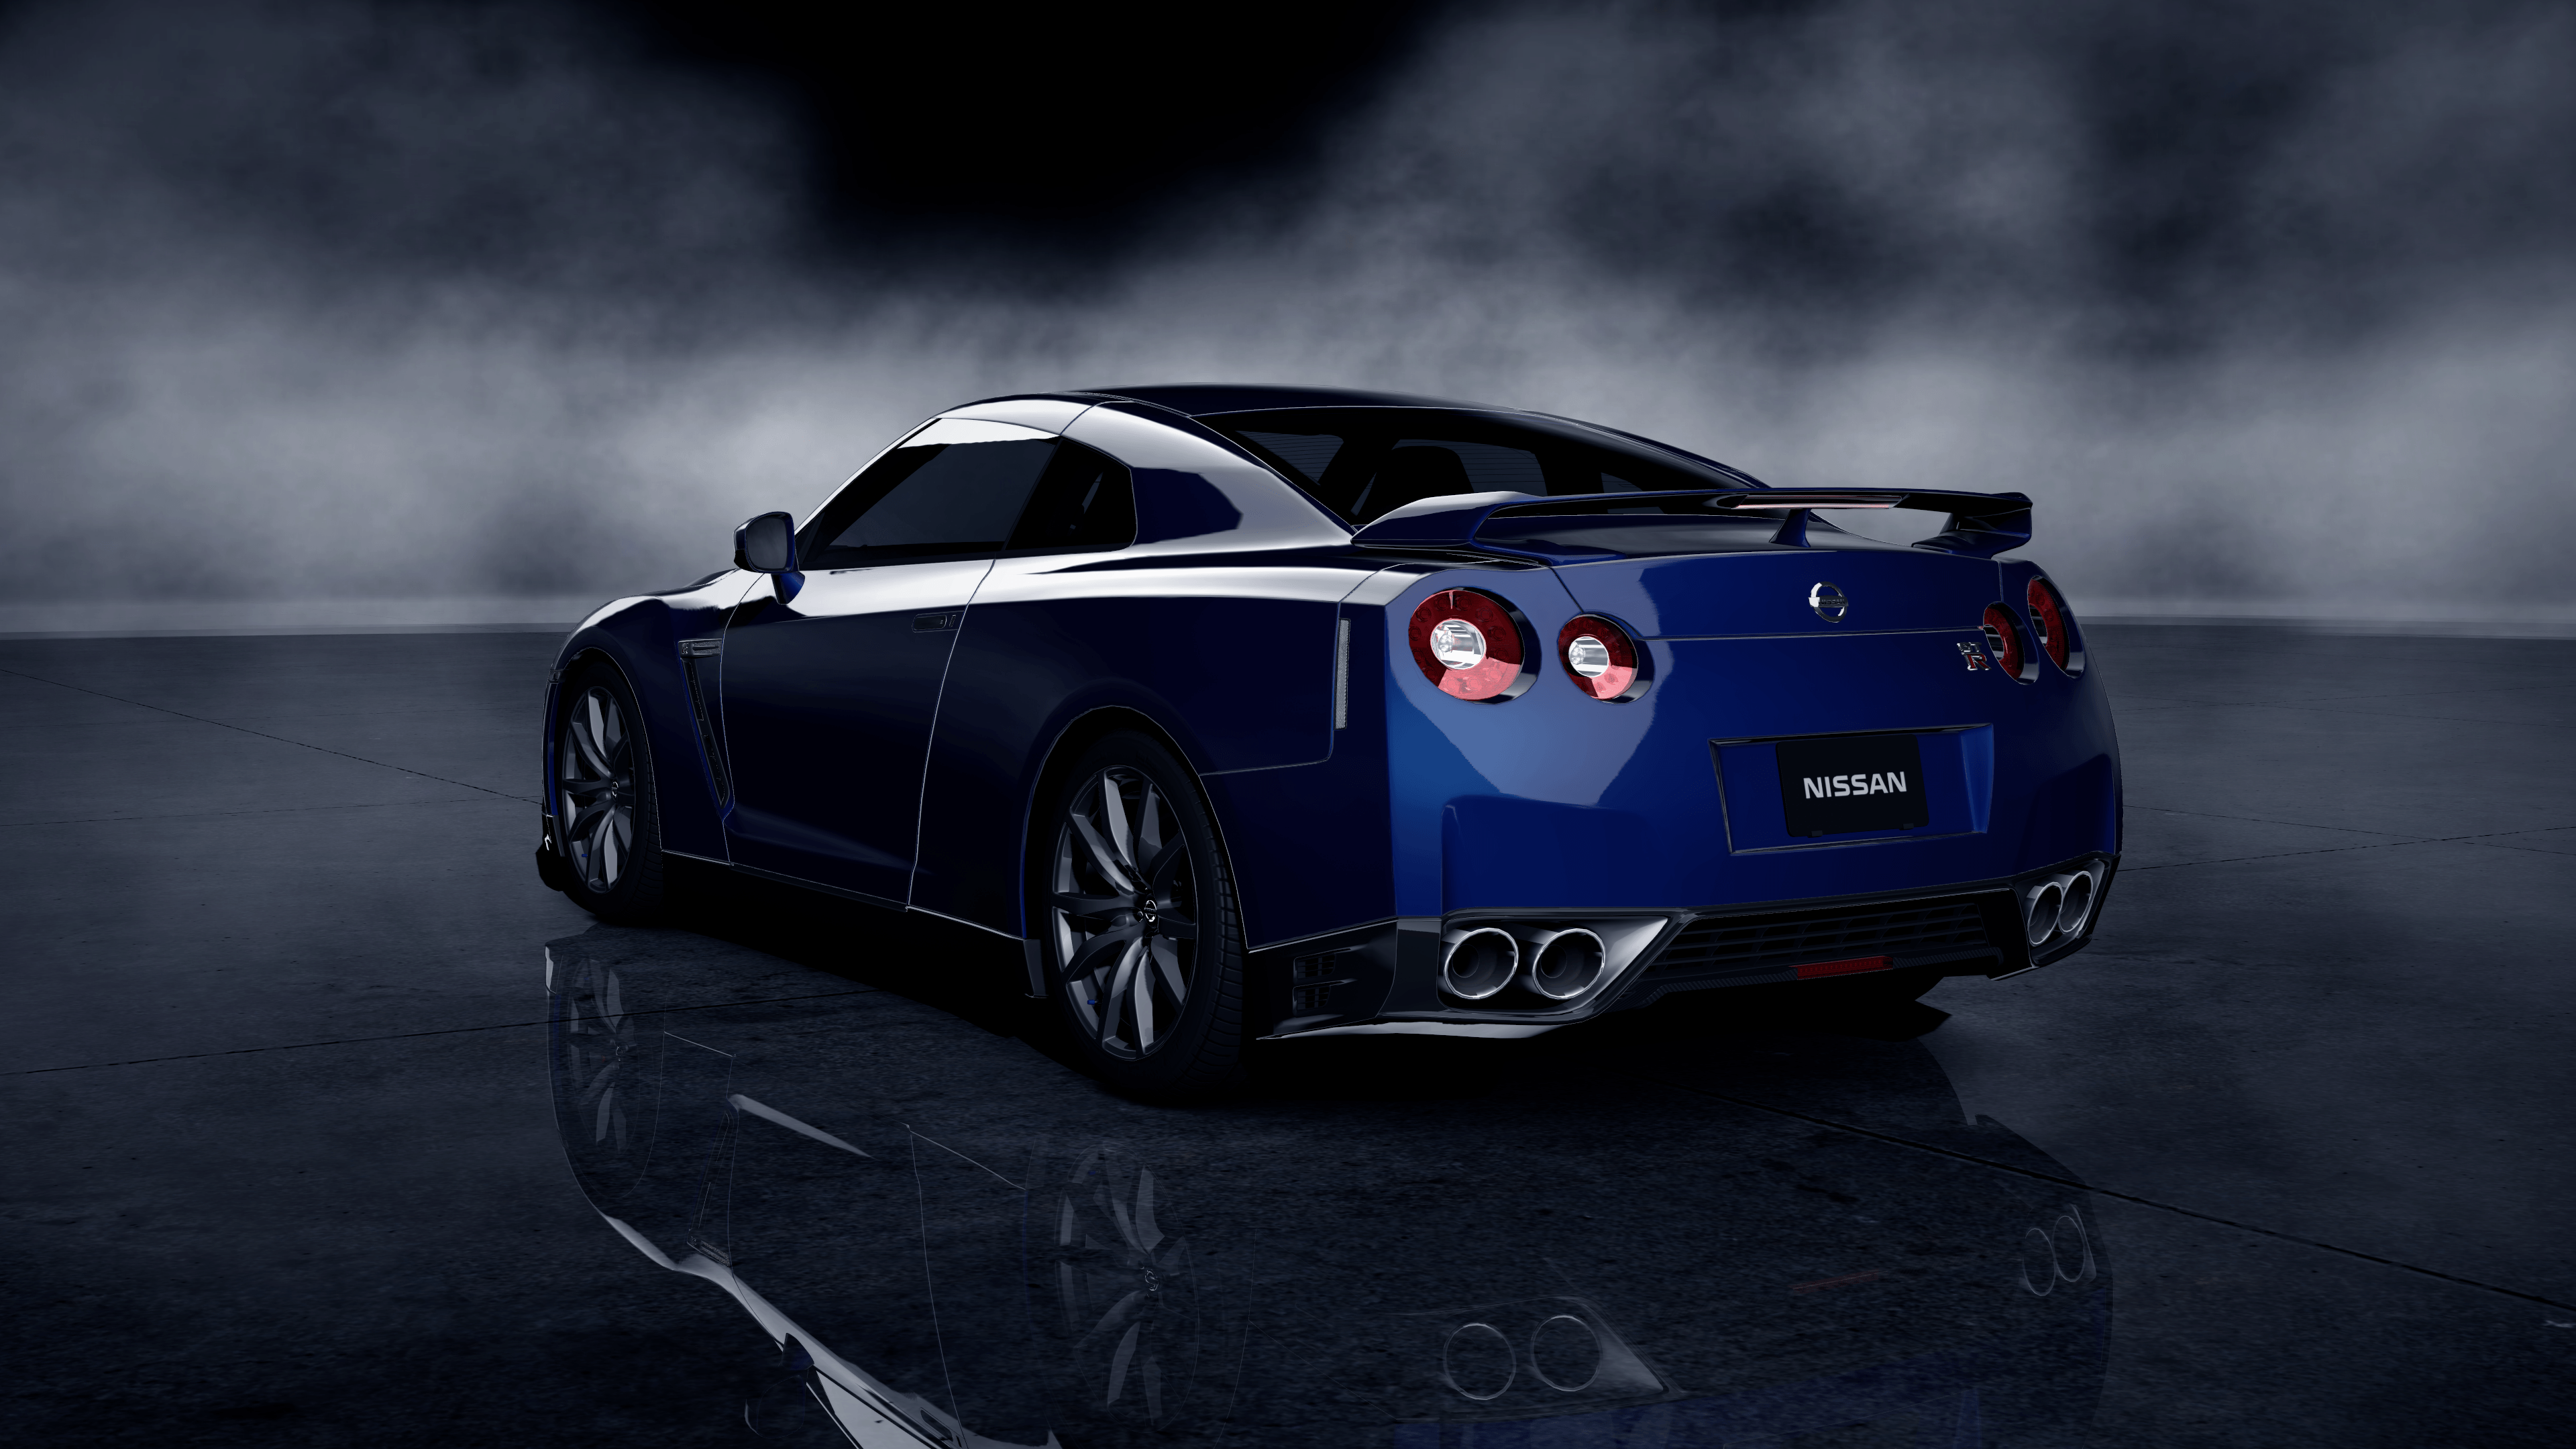 Blue Nissan GT-R Wallpapers - Top Free Blue Nissan GT-R ...